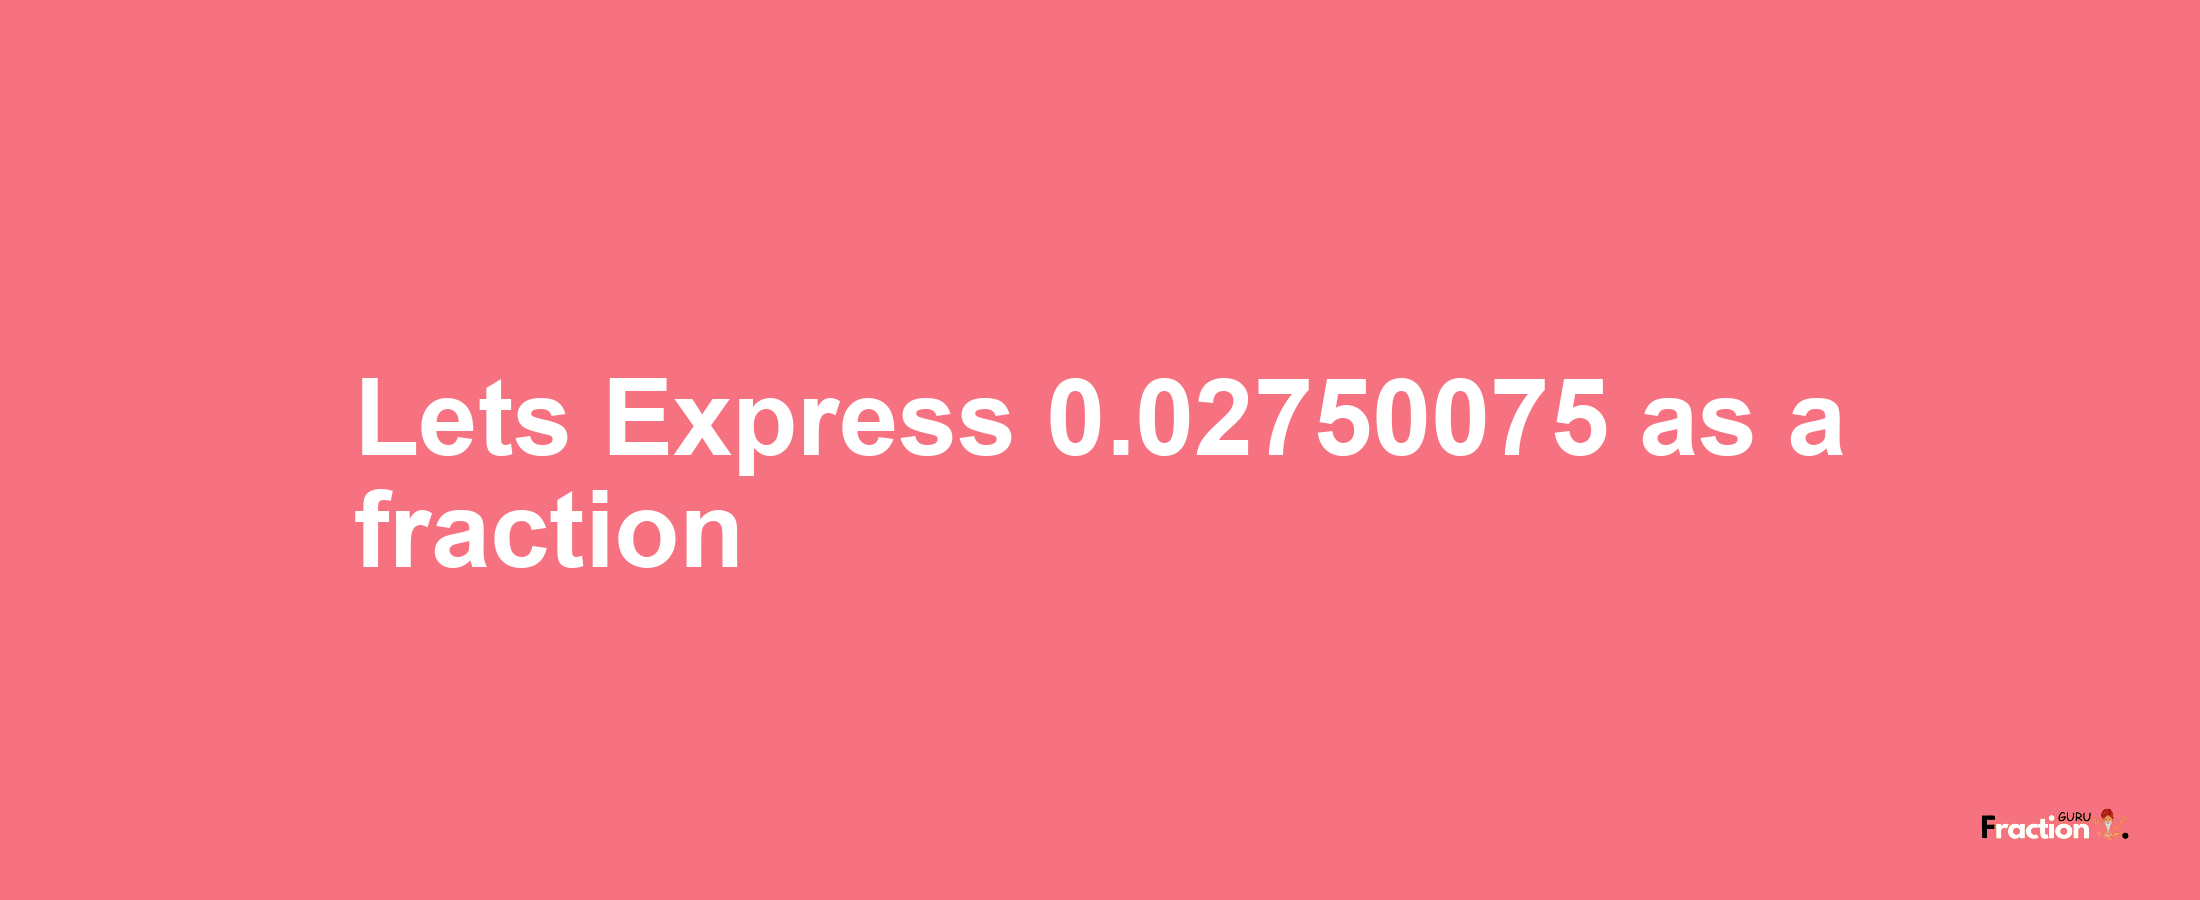 Lets Express 0.02750075 as afraction